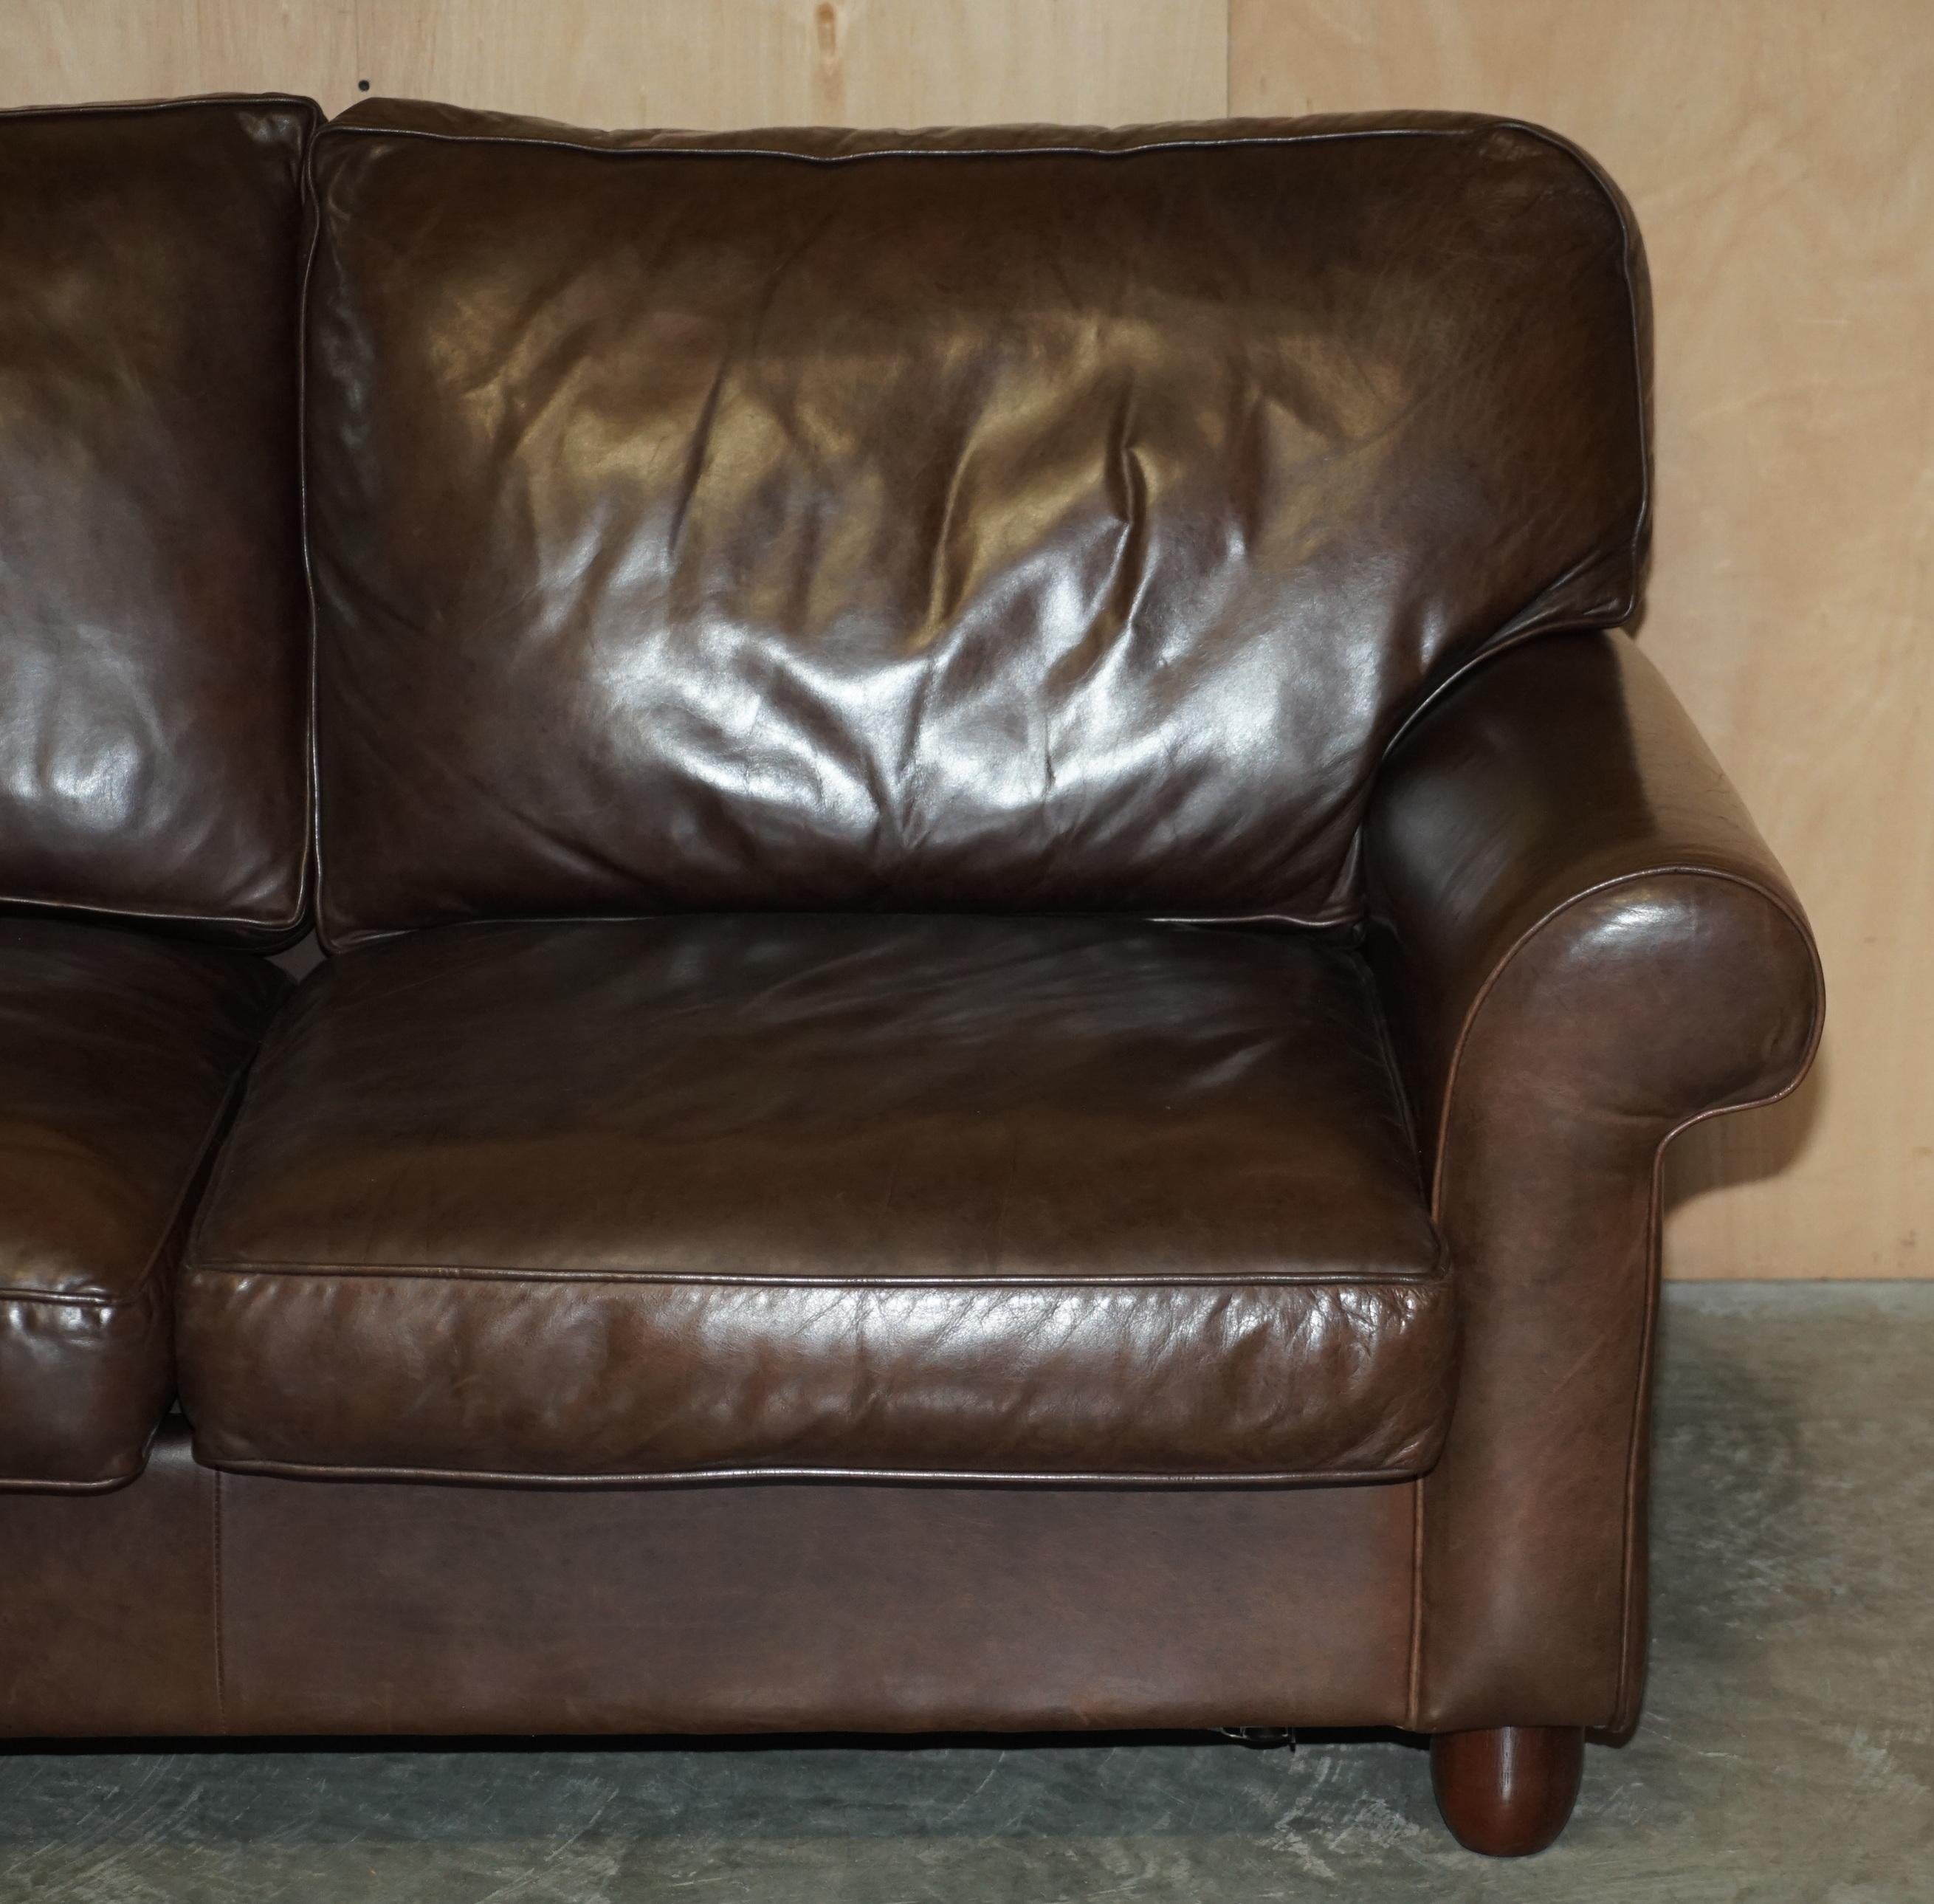 LOVELY HERITAGE BROWN LEATHER LAURA ASHLEY MORTIMER SOFABED IN SEHR GUTEM ZUSTAND (Englisch) im Angebot